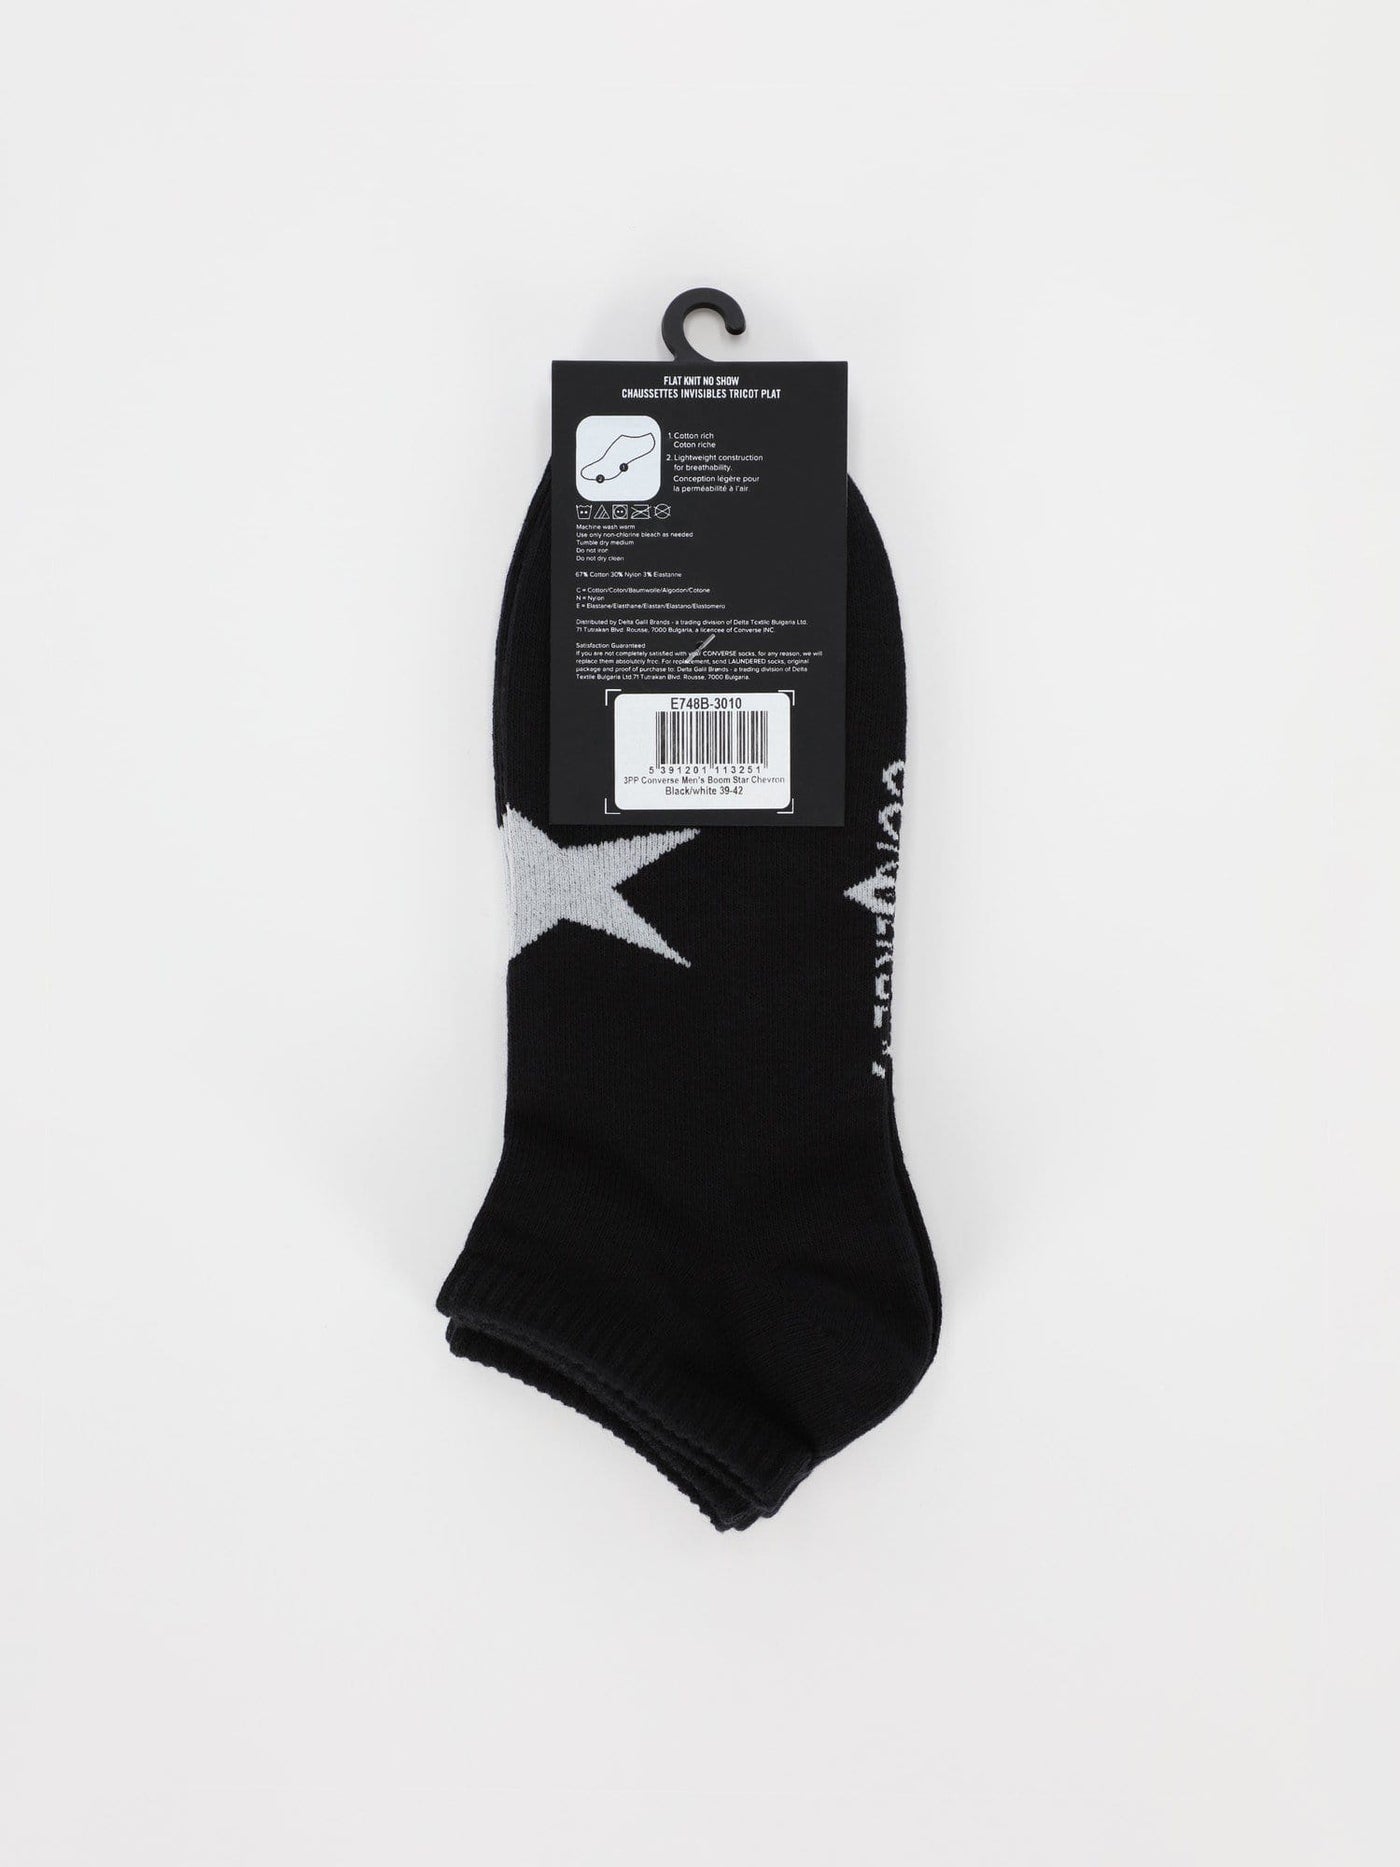 Converse Other Accessories 7 / MISC 3 Pairs of Flat Knit No Show Socks with Star Chevron Logo - Black